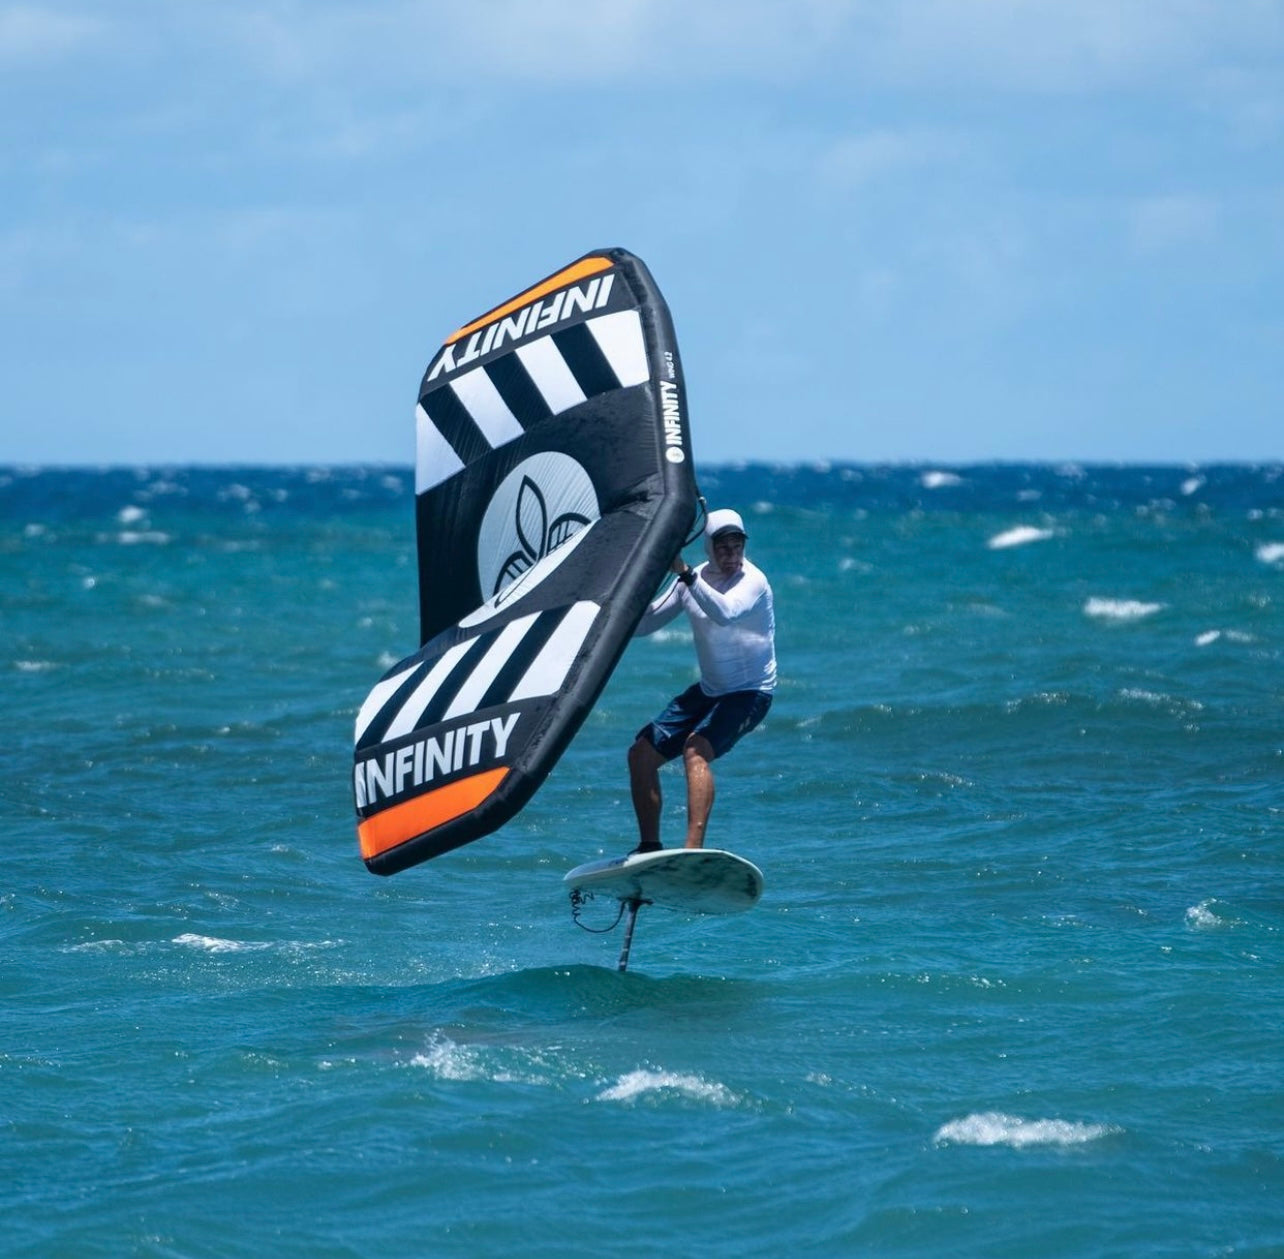 INFINITY FLY WIND WING – Shred & Speed